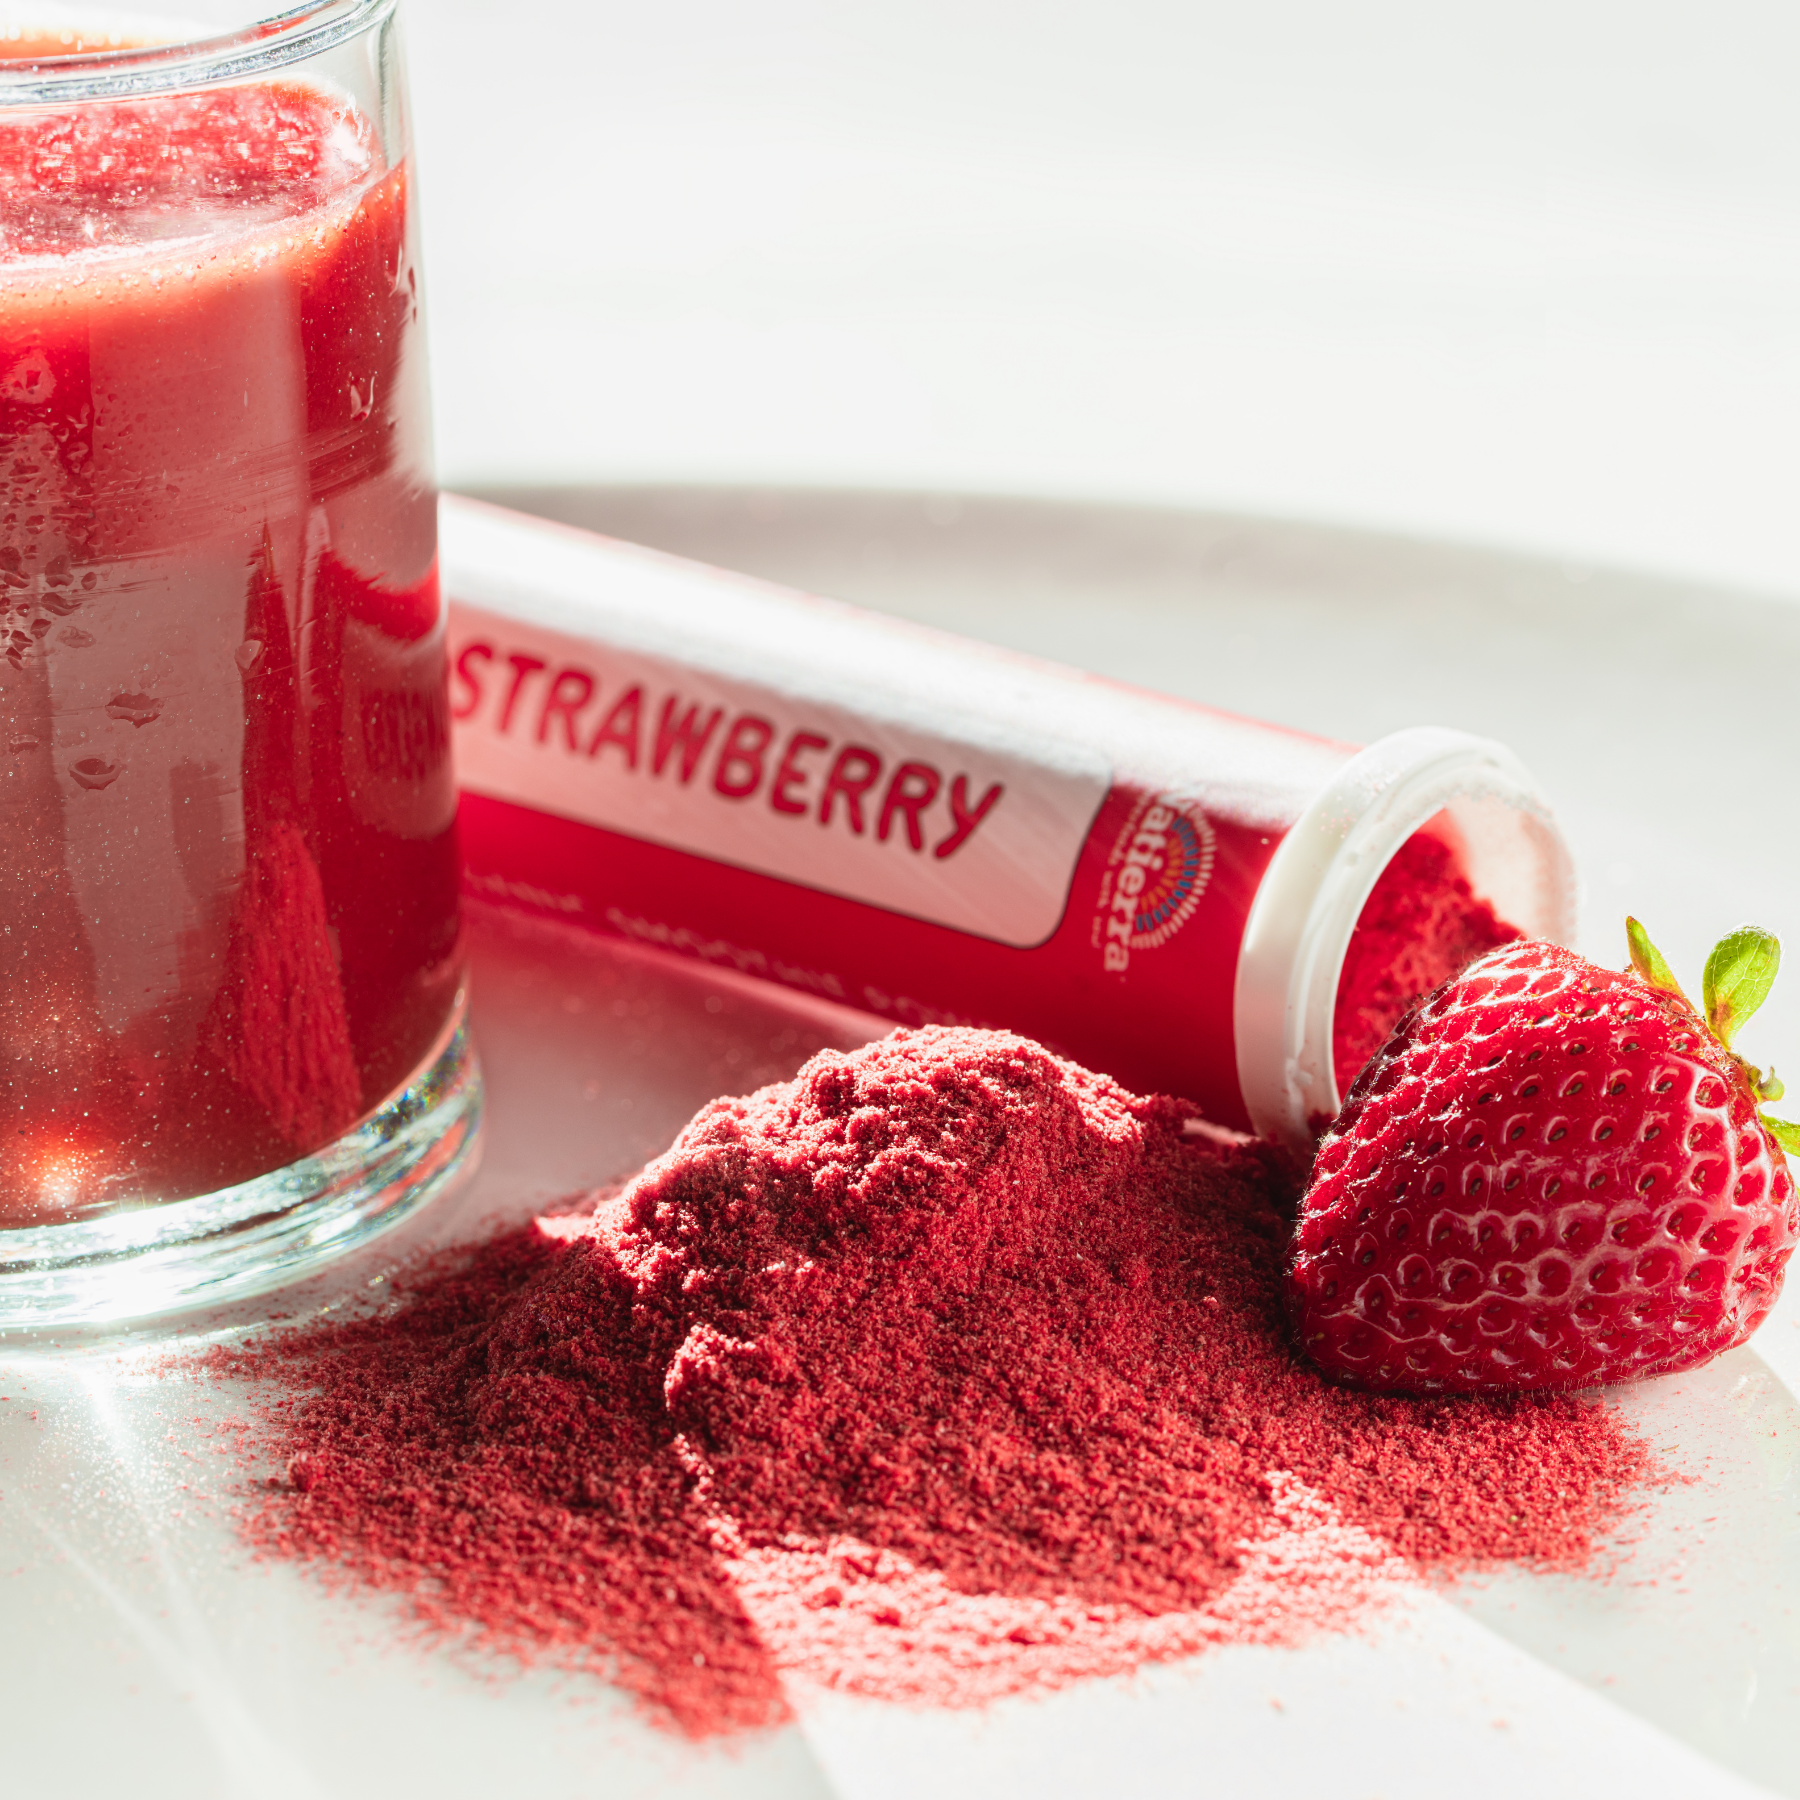 Open Natierra Strawberry Smoothie tube next to spilled powder, strawberry and smoothie in glass